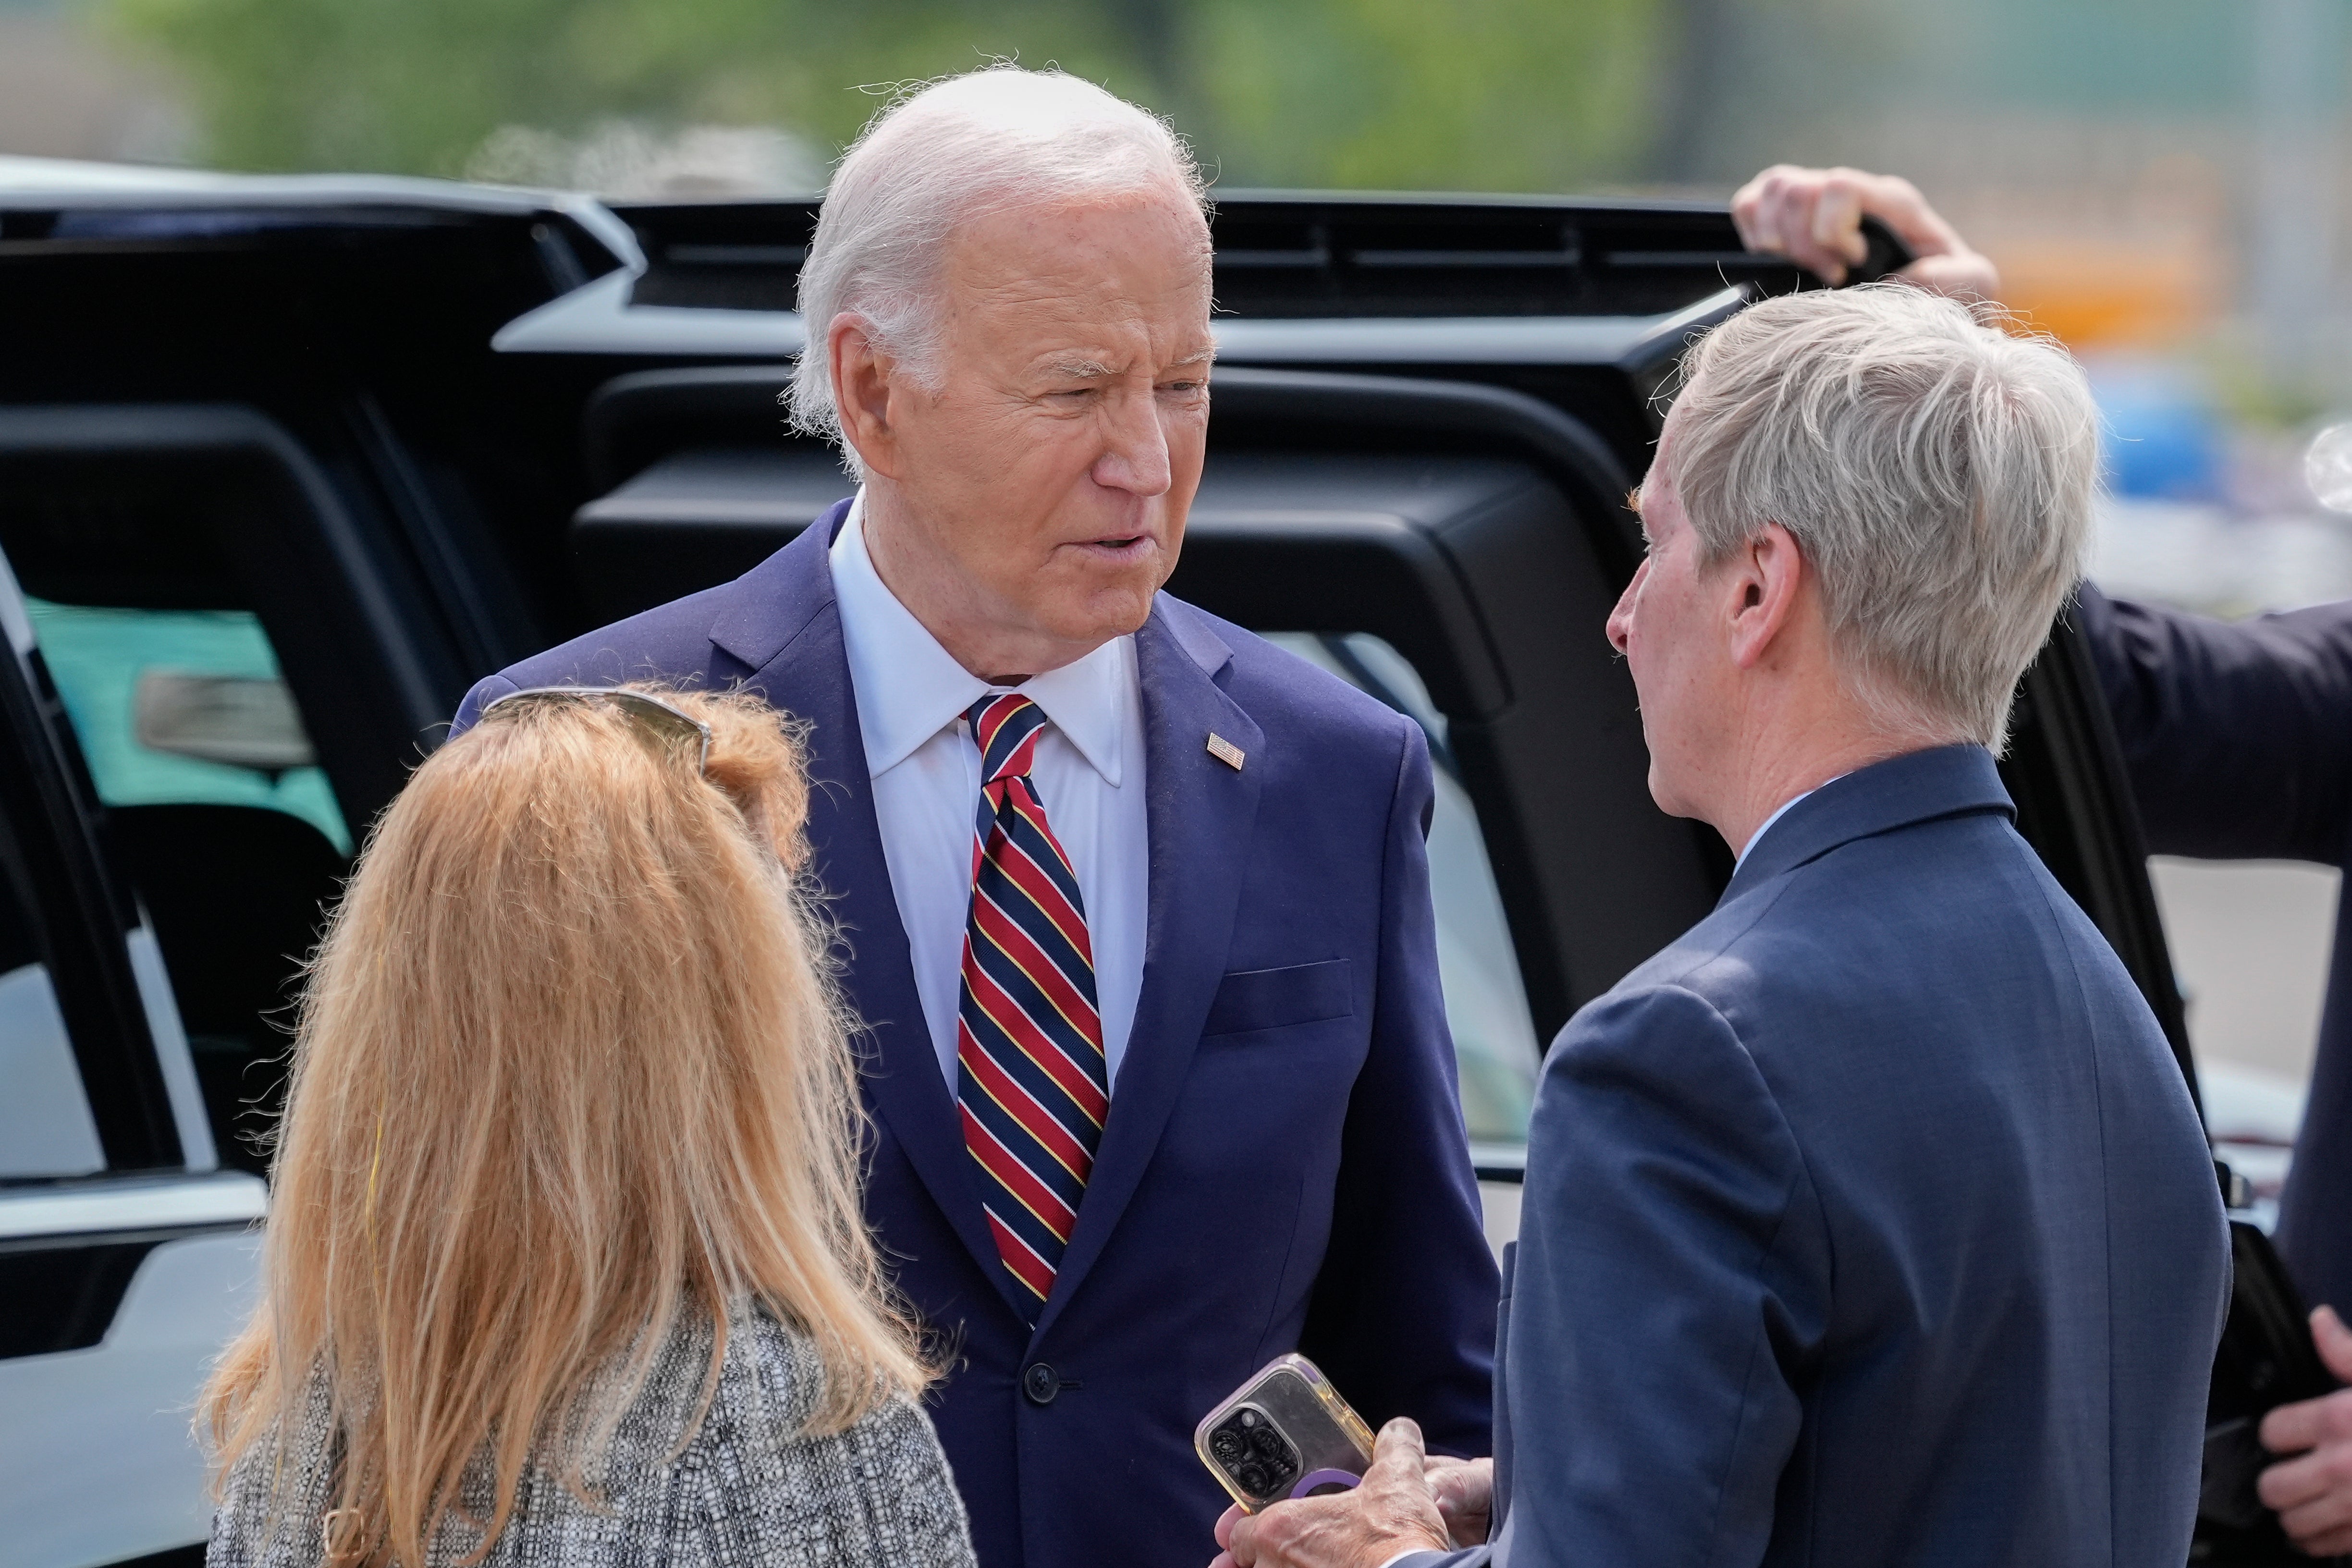 President Joe Biden, center, talks with John Lynch, former Governor of New Hampshire, right, and Lynch's spouse Dr. Susan Lynch, left, on the tarmac during Air Force One arrival at Manchester-Boston Regional Airport, Tuesday, May 21, 2024, in Manchester, N.H. (AP Photo/Alex Brandon)